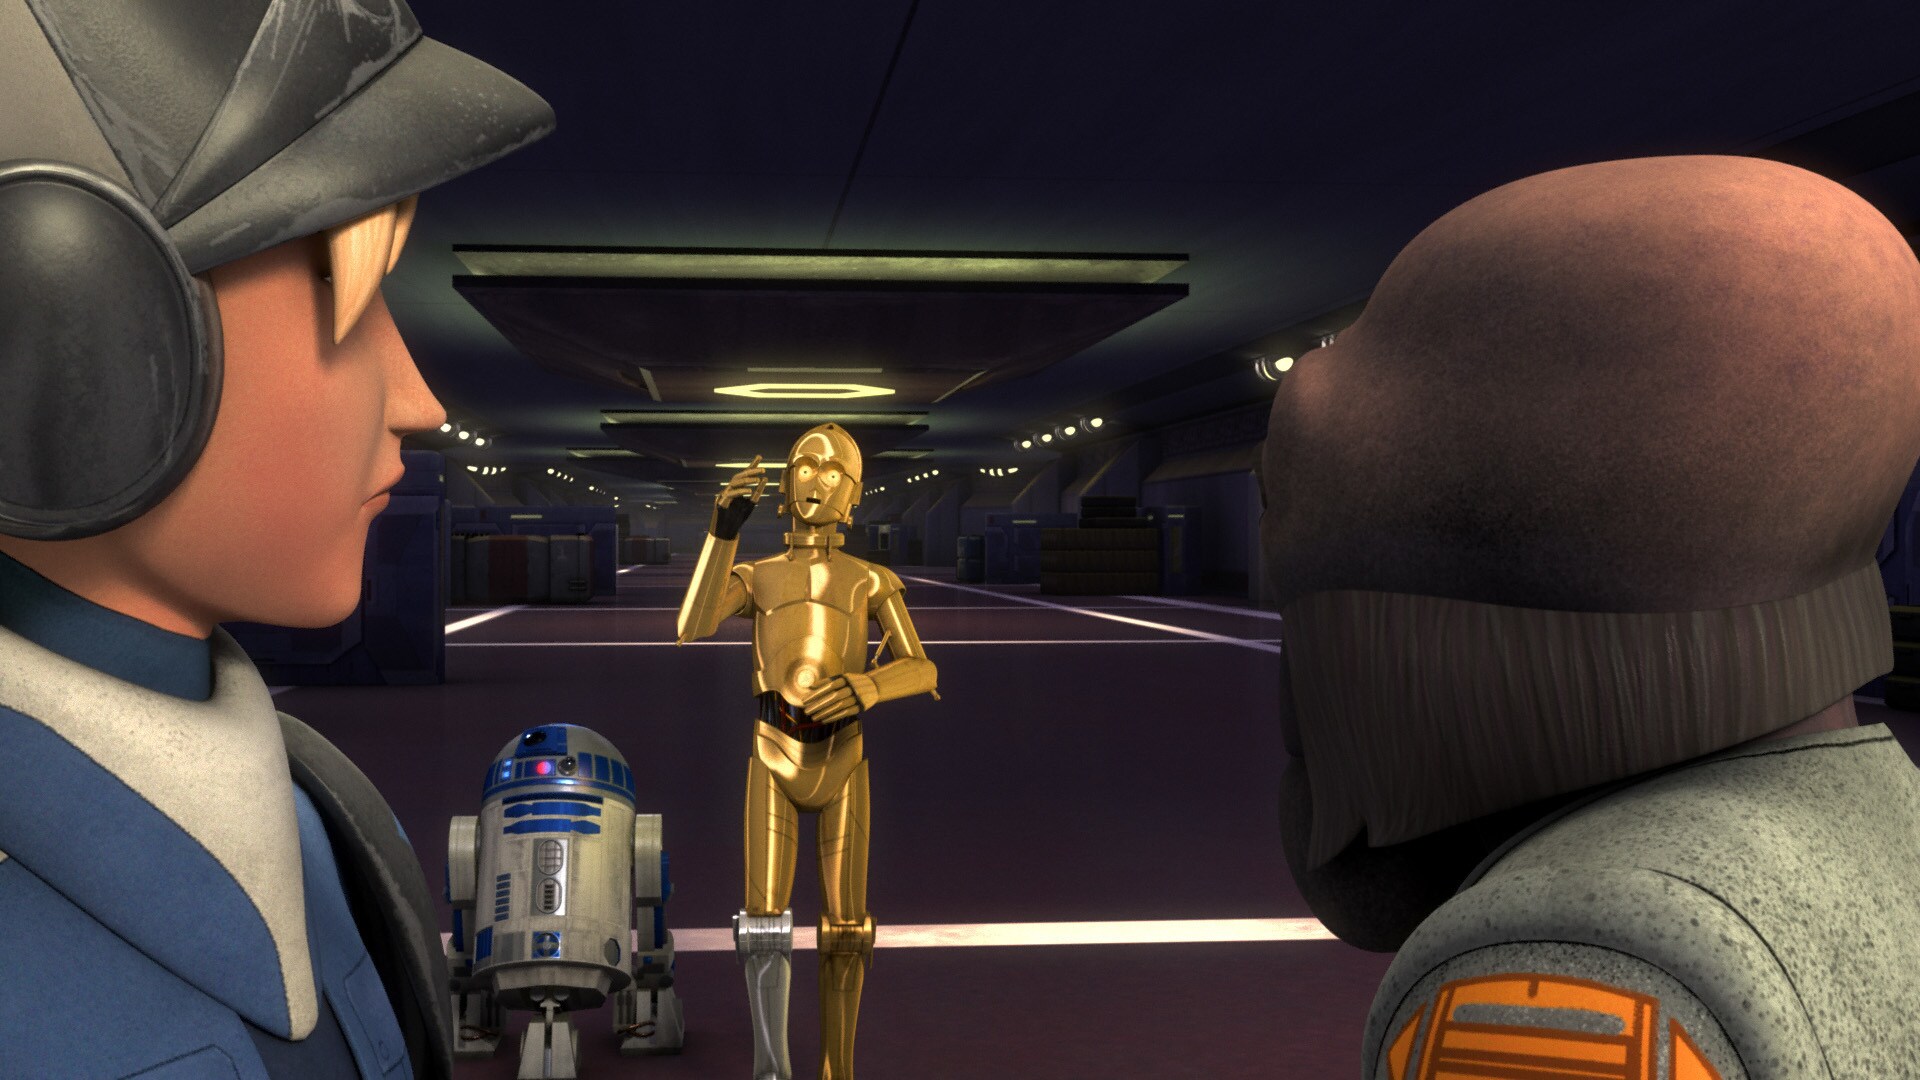 Though it may seem counterintuitive to think of R2-D2 and C-3PO as “Imperial droids” (which is wh...